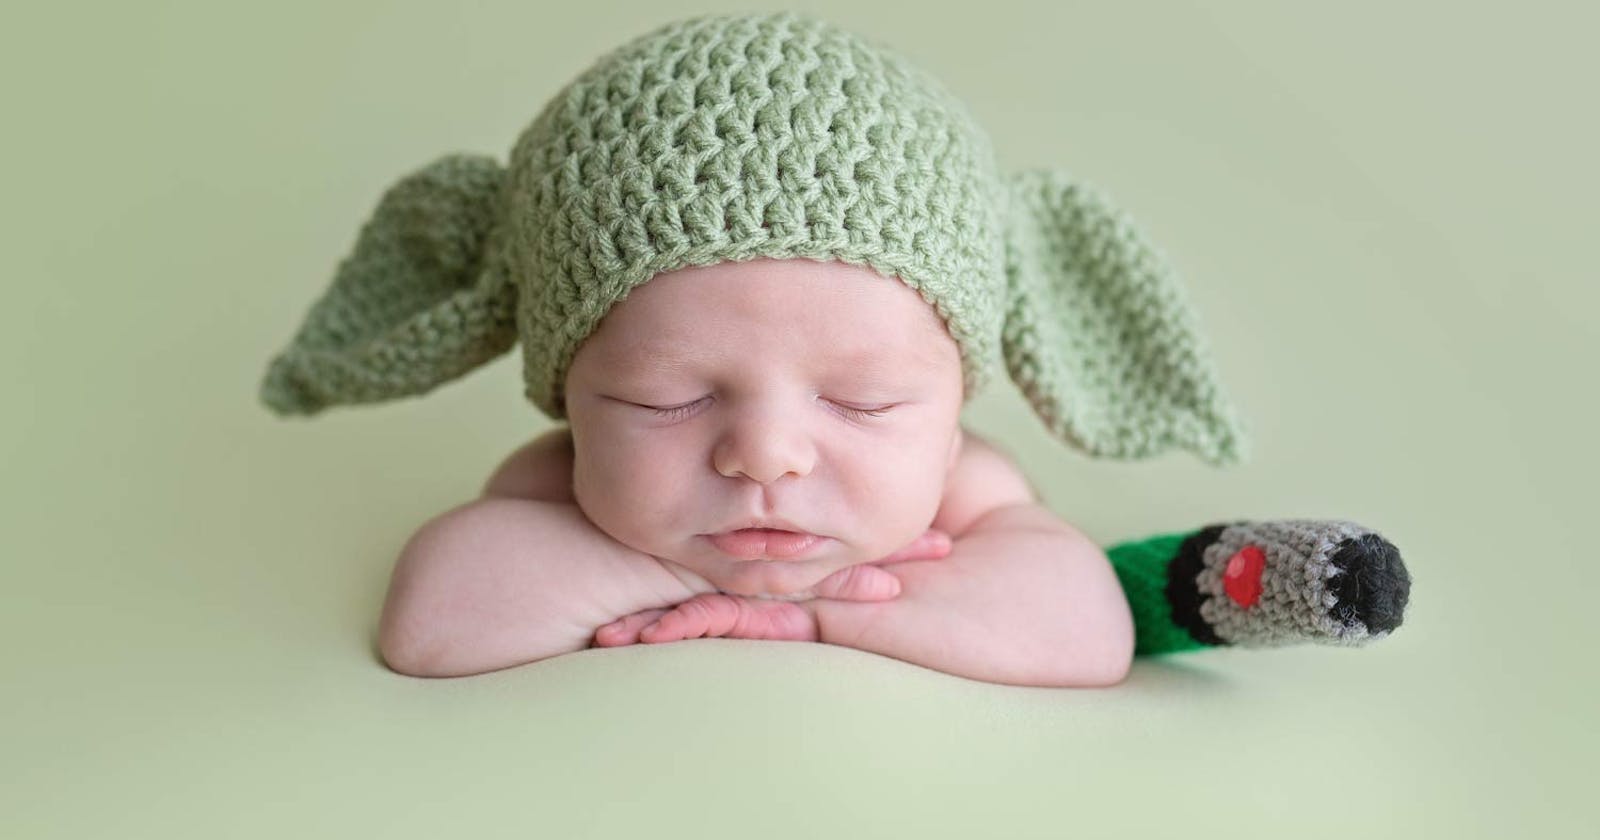 How To Choose A Good Newborn Baby Photographer.